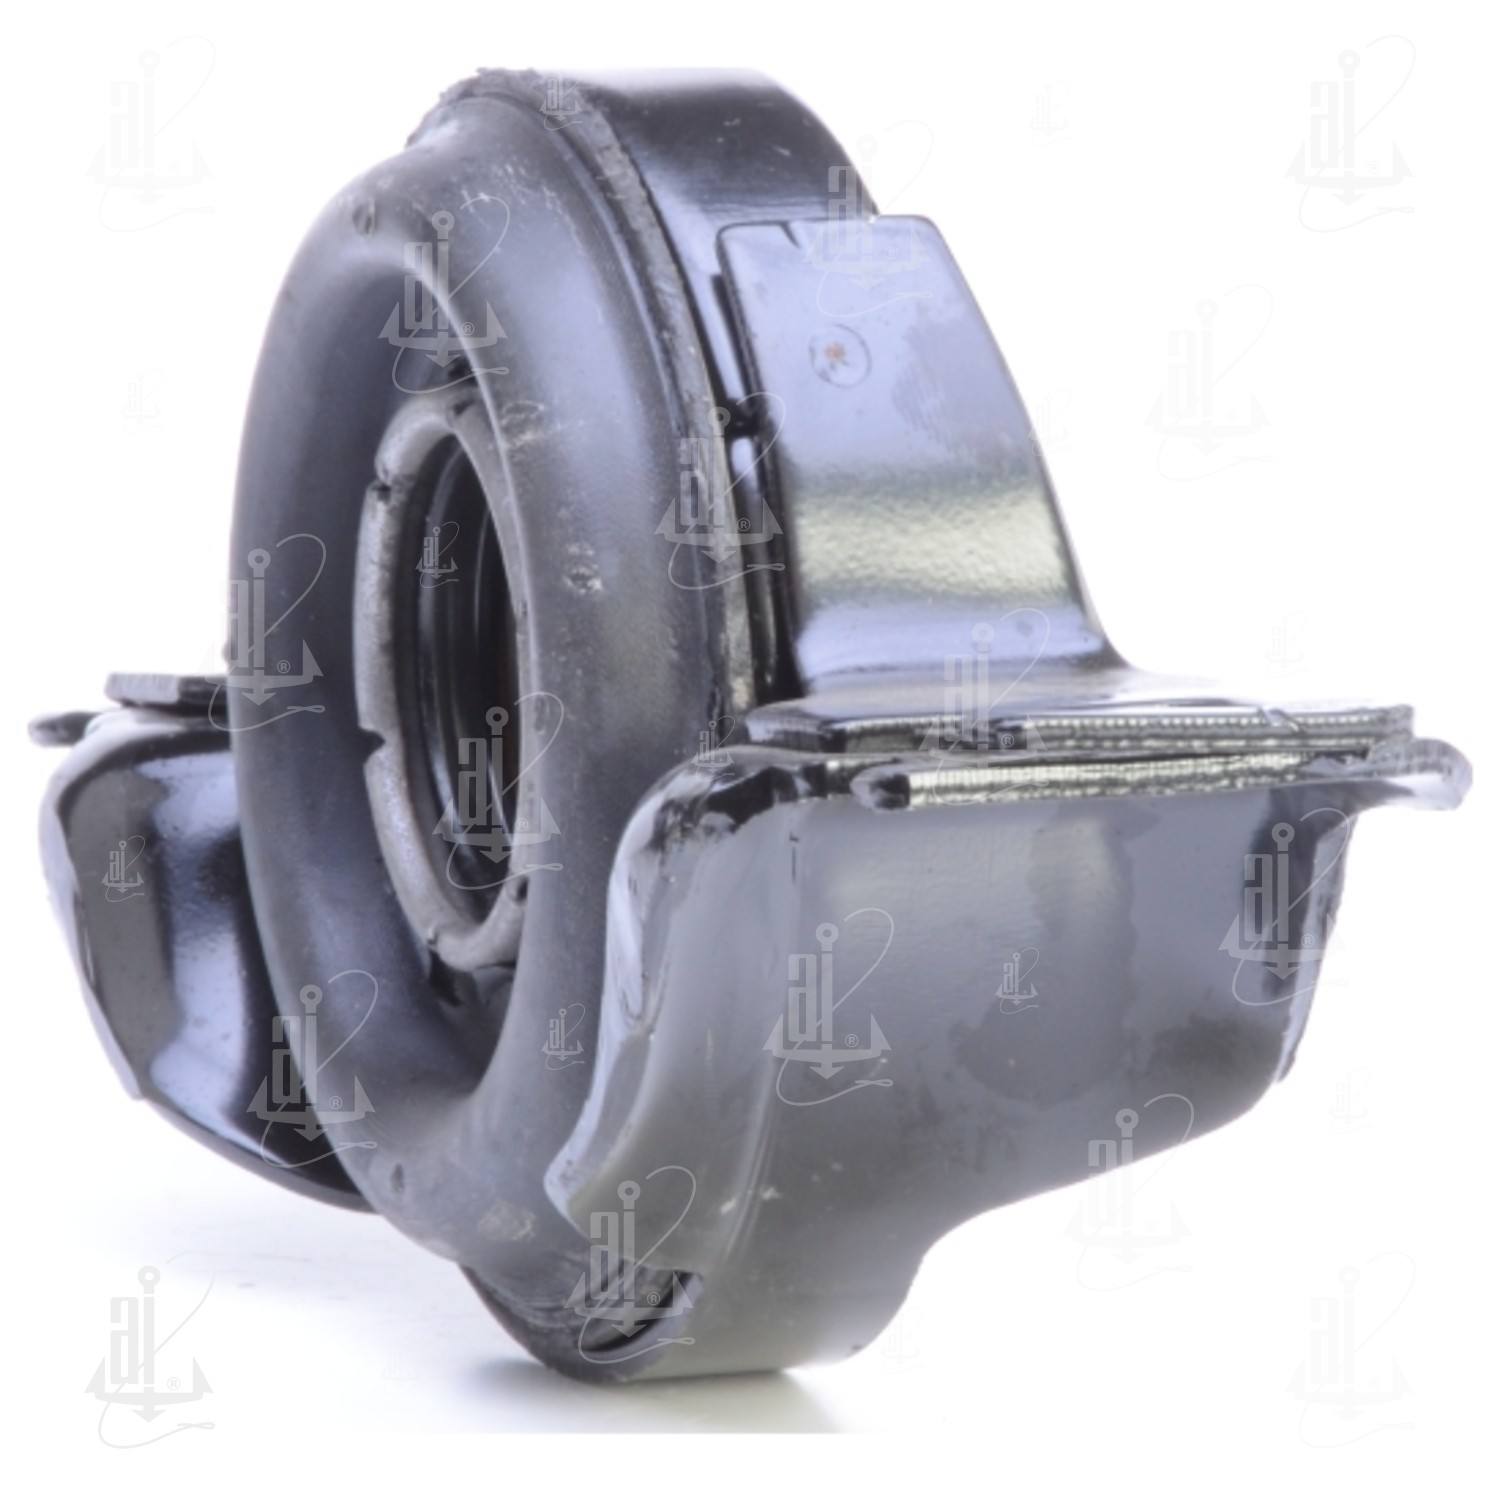 Left View of Center Drive Shaft Center Support Bearing ANCHOR 6082